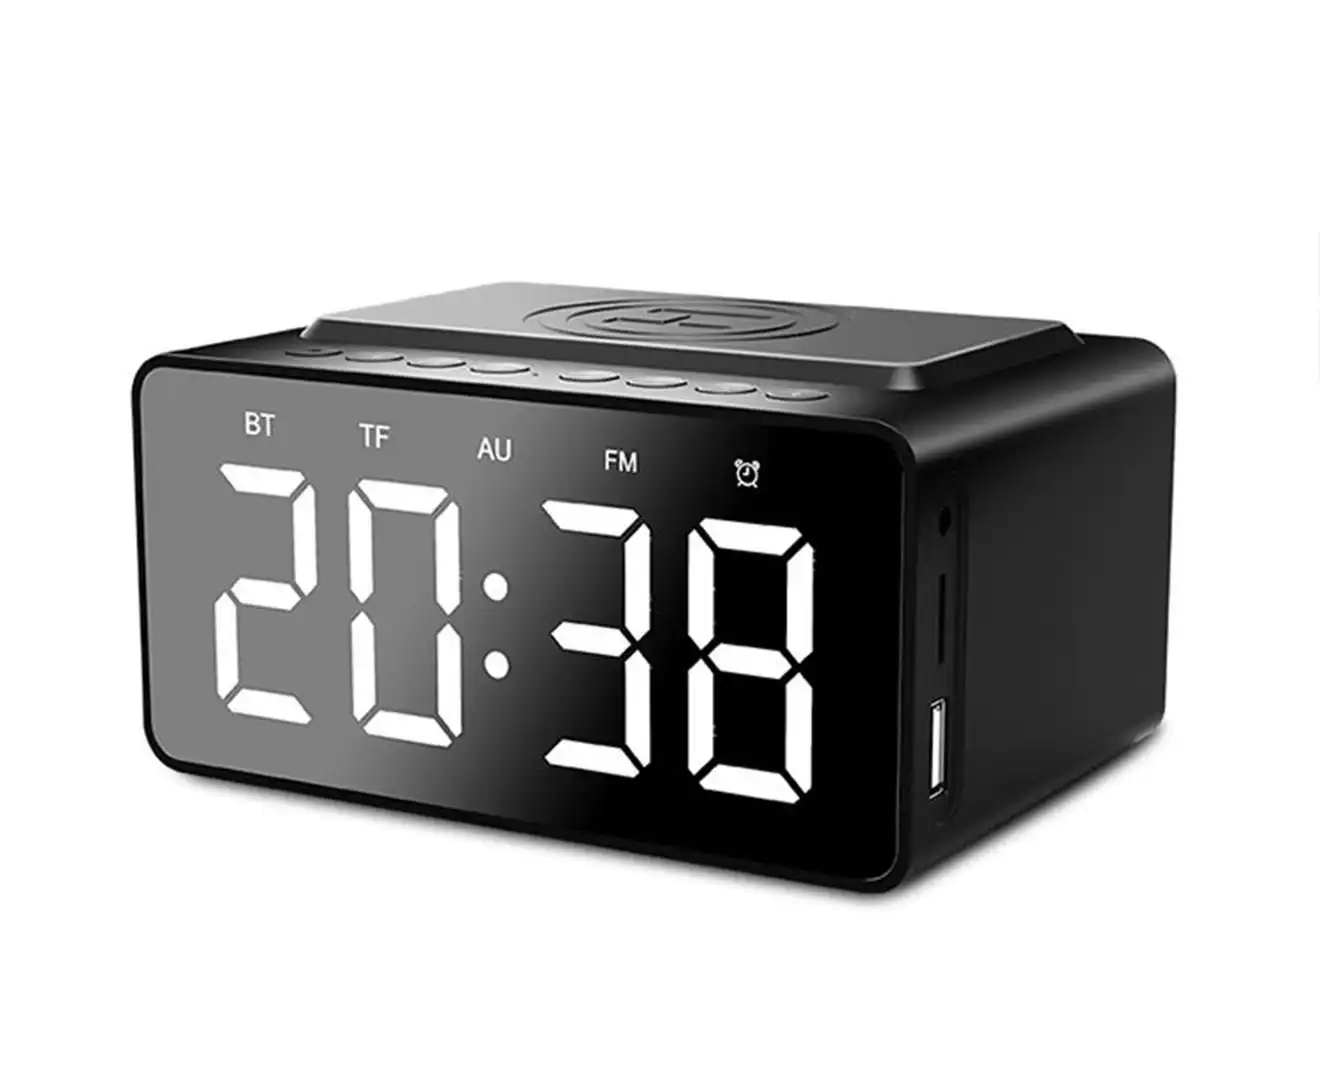 Three-in-One LED Alarm Clock Bluetooth Speaker with Wireless Charging